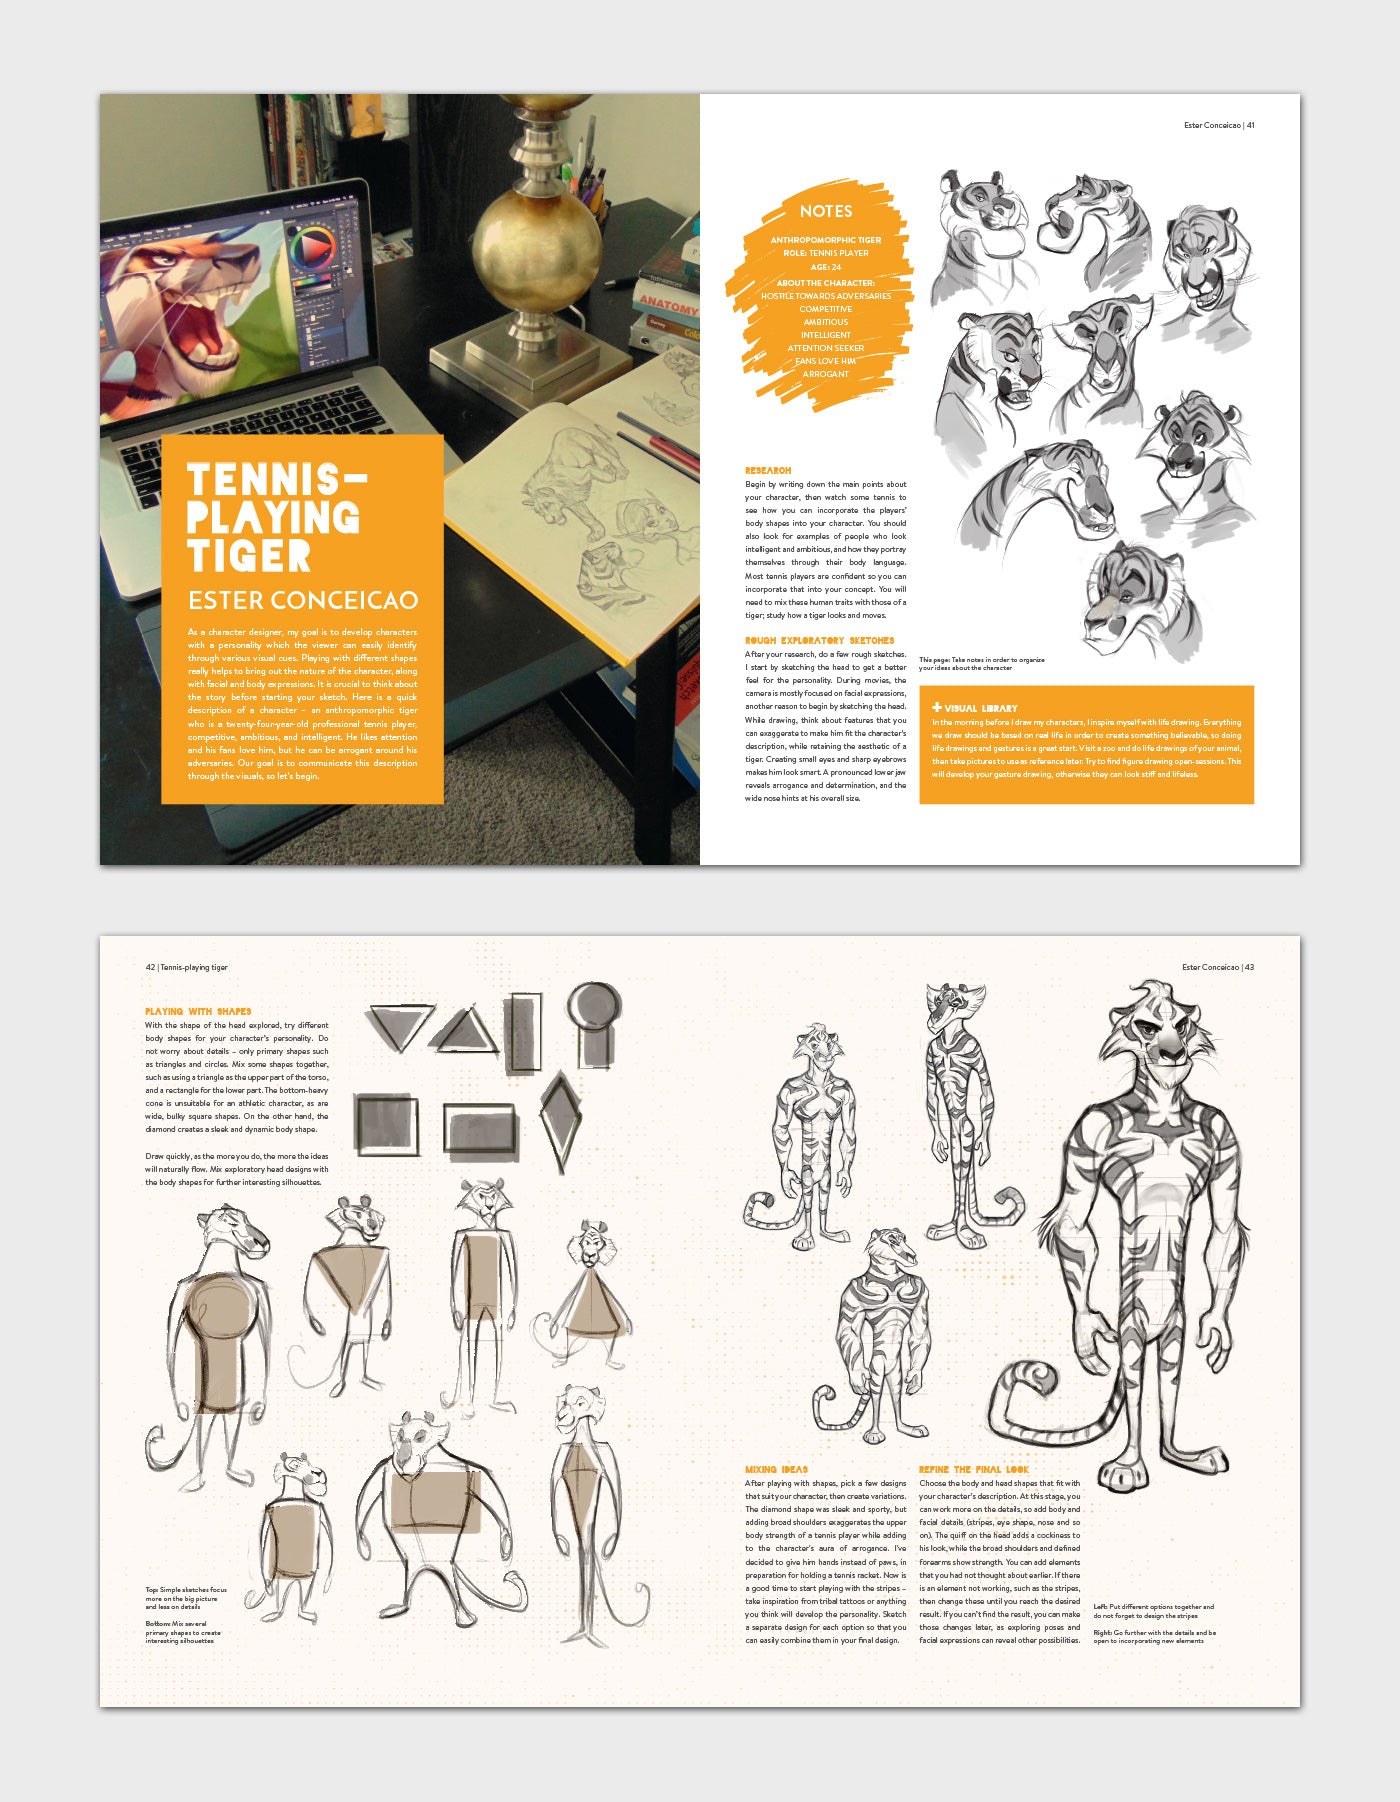 Character Design Quarterly issue 05 (Downloadable Edition)